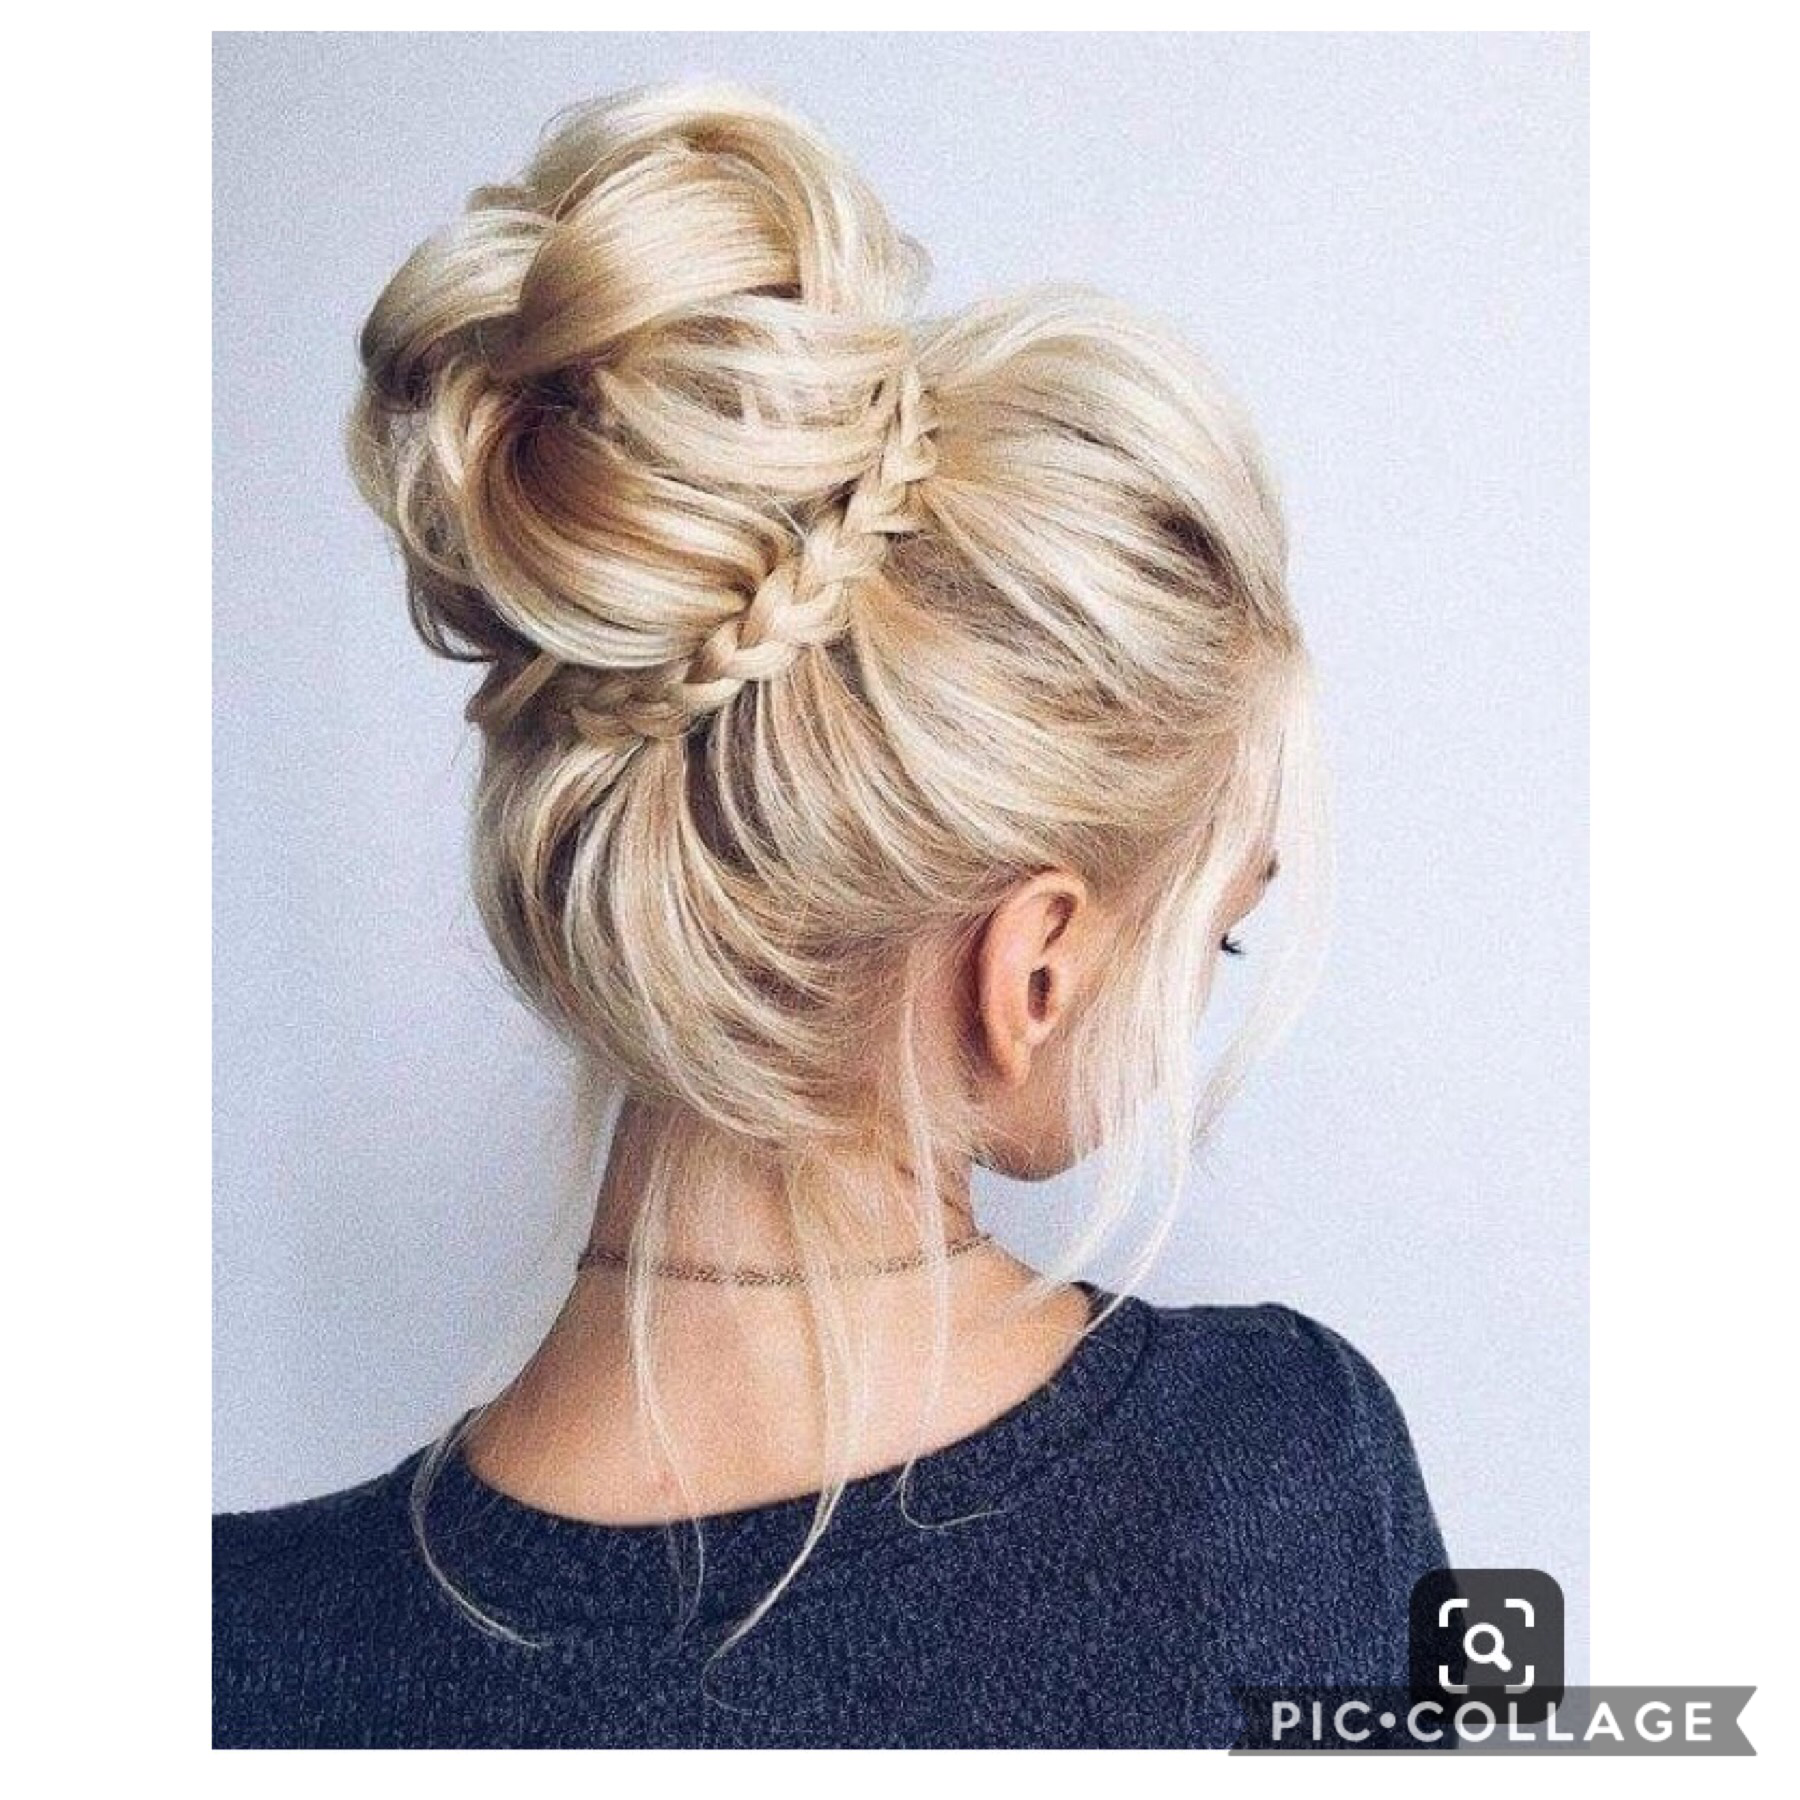 I wish I could get my bun to look this perfect😂 
3-22-19